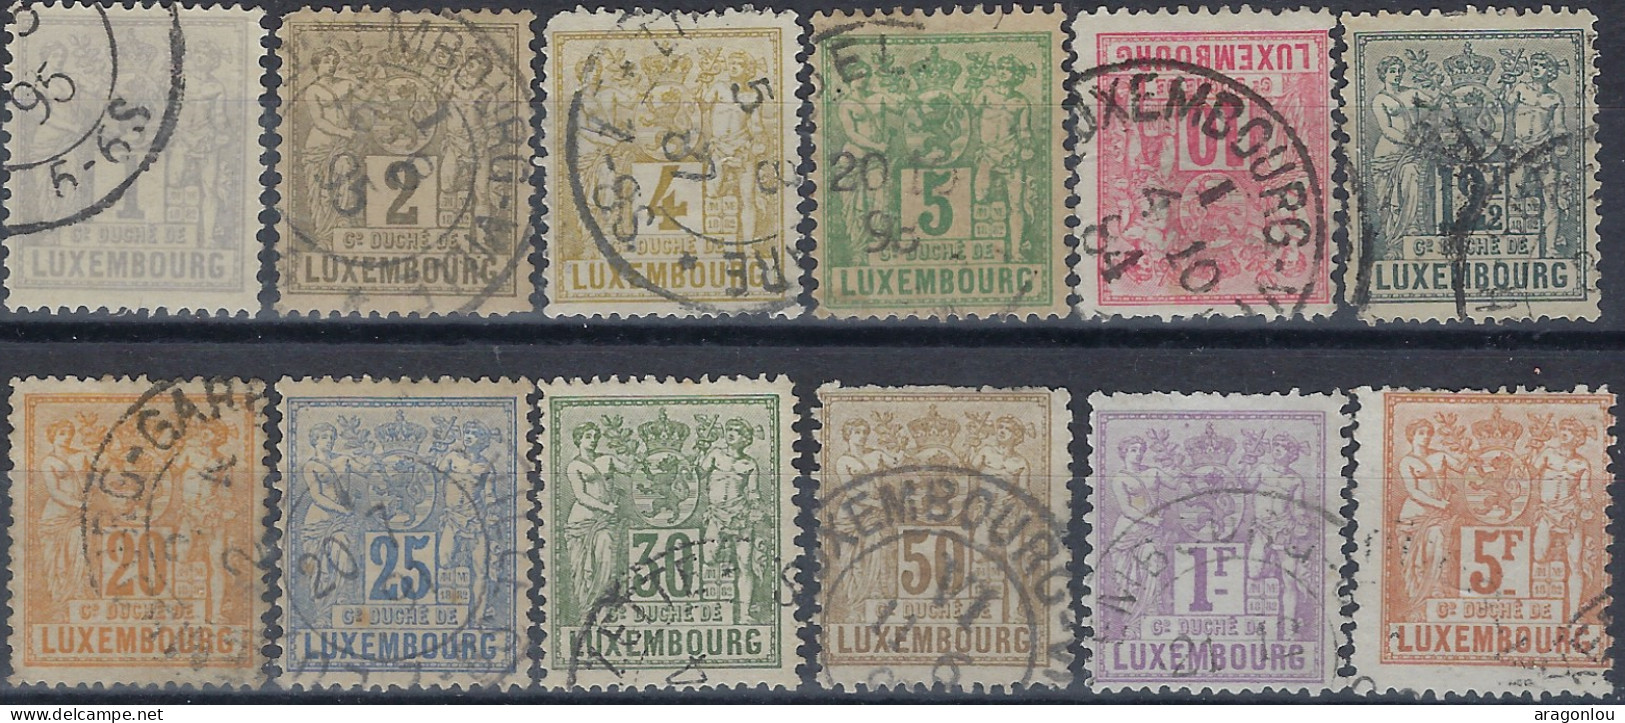 Luxembourg - Luxemburg - Timbres  1882   Allégorie   °   Satz   VC.  300,- - 1882 Allegory